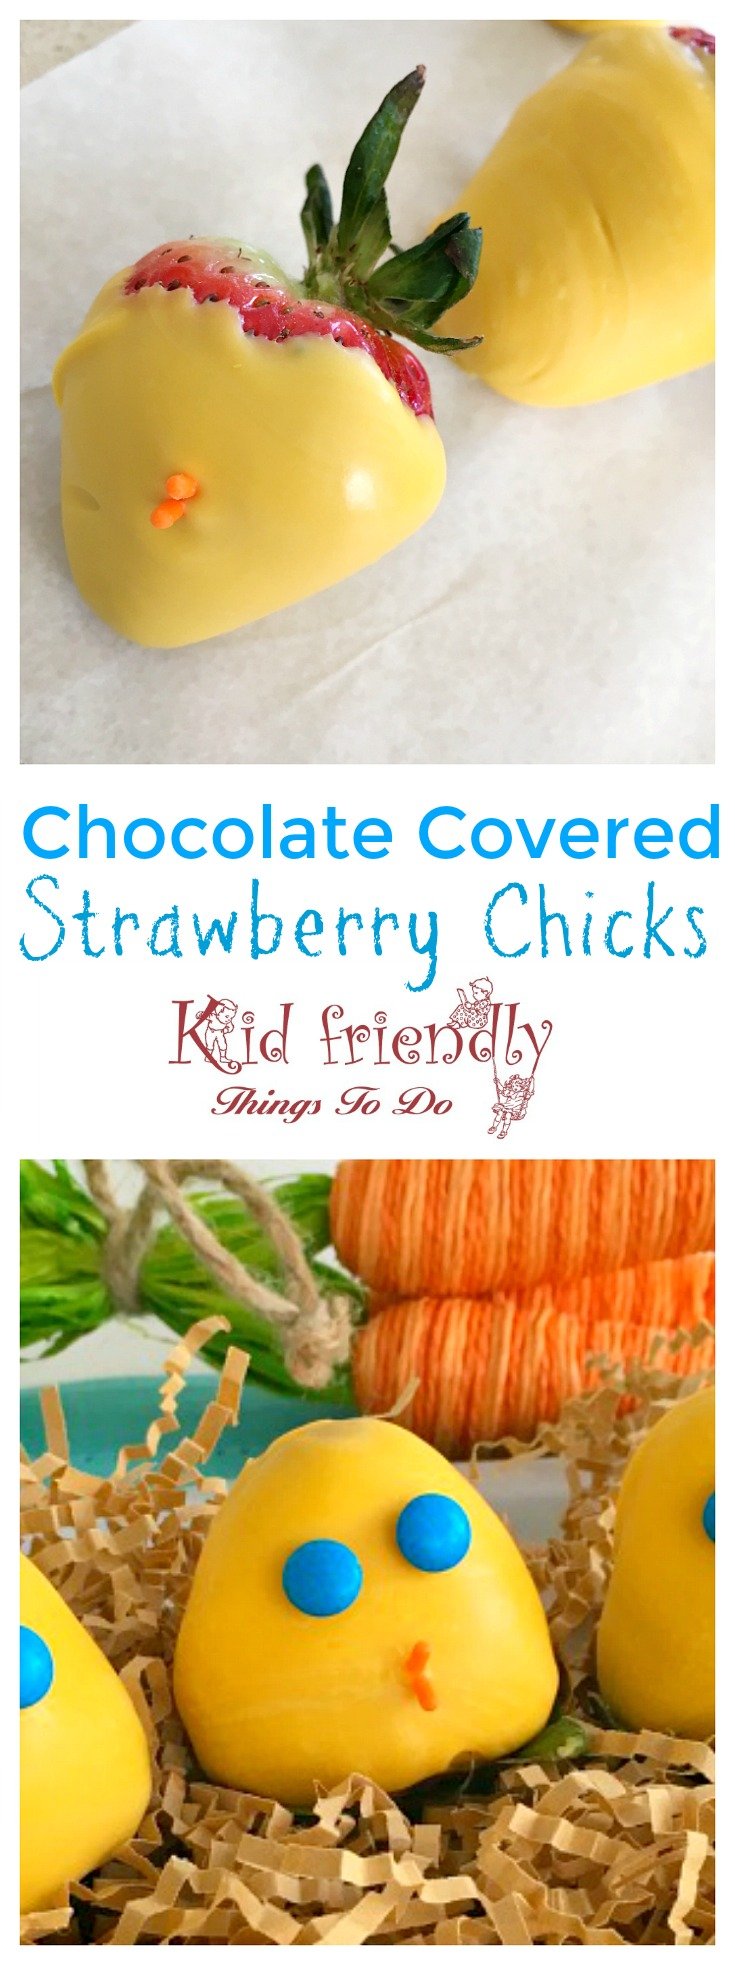 Chocolate Covered Strawberry Easter or Spring Chicks for a fun and easy food treat with the kids - www.kidfriendlythingstodo.com